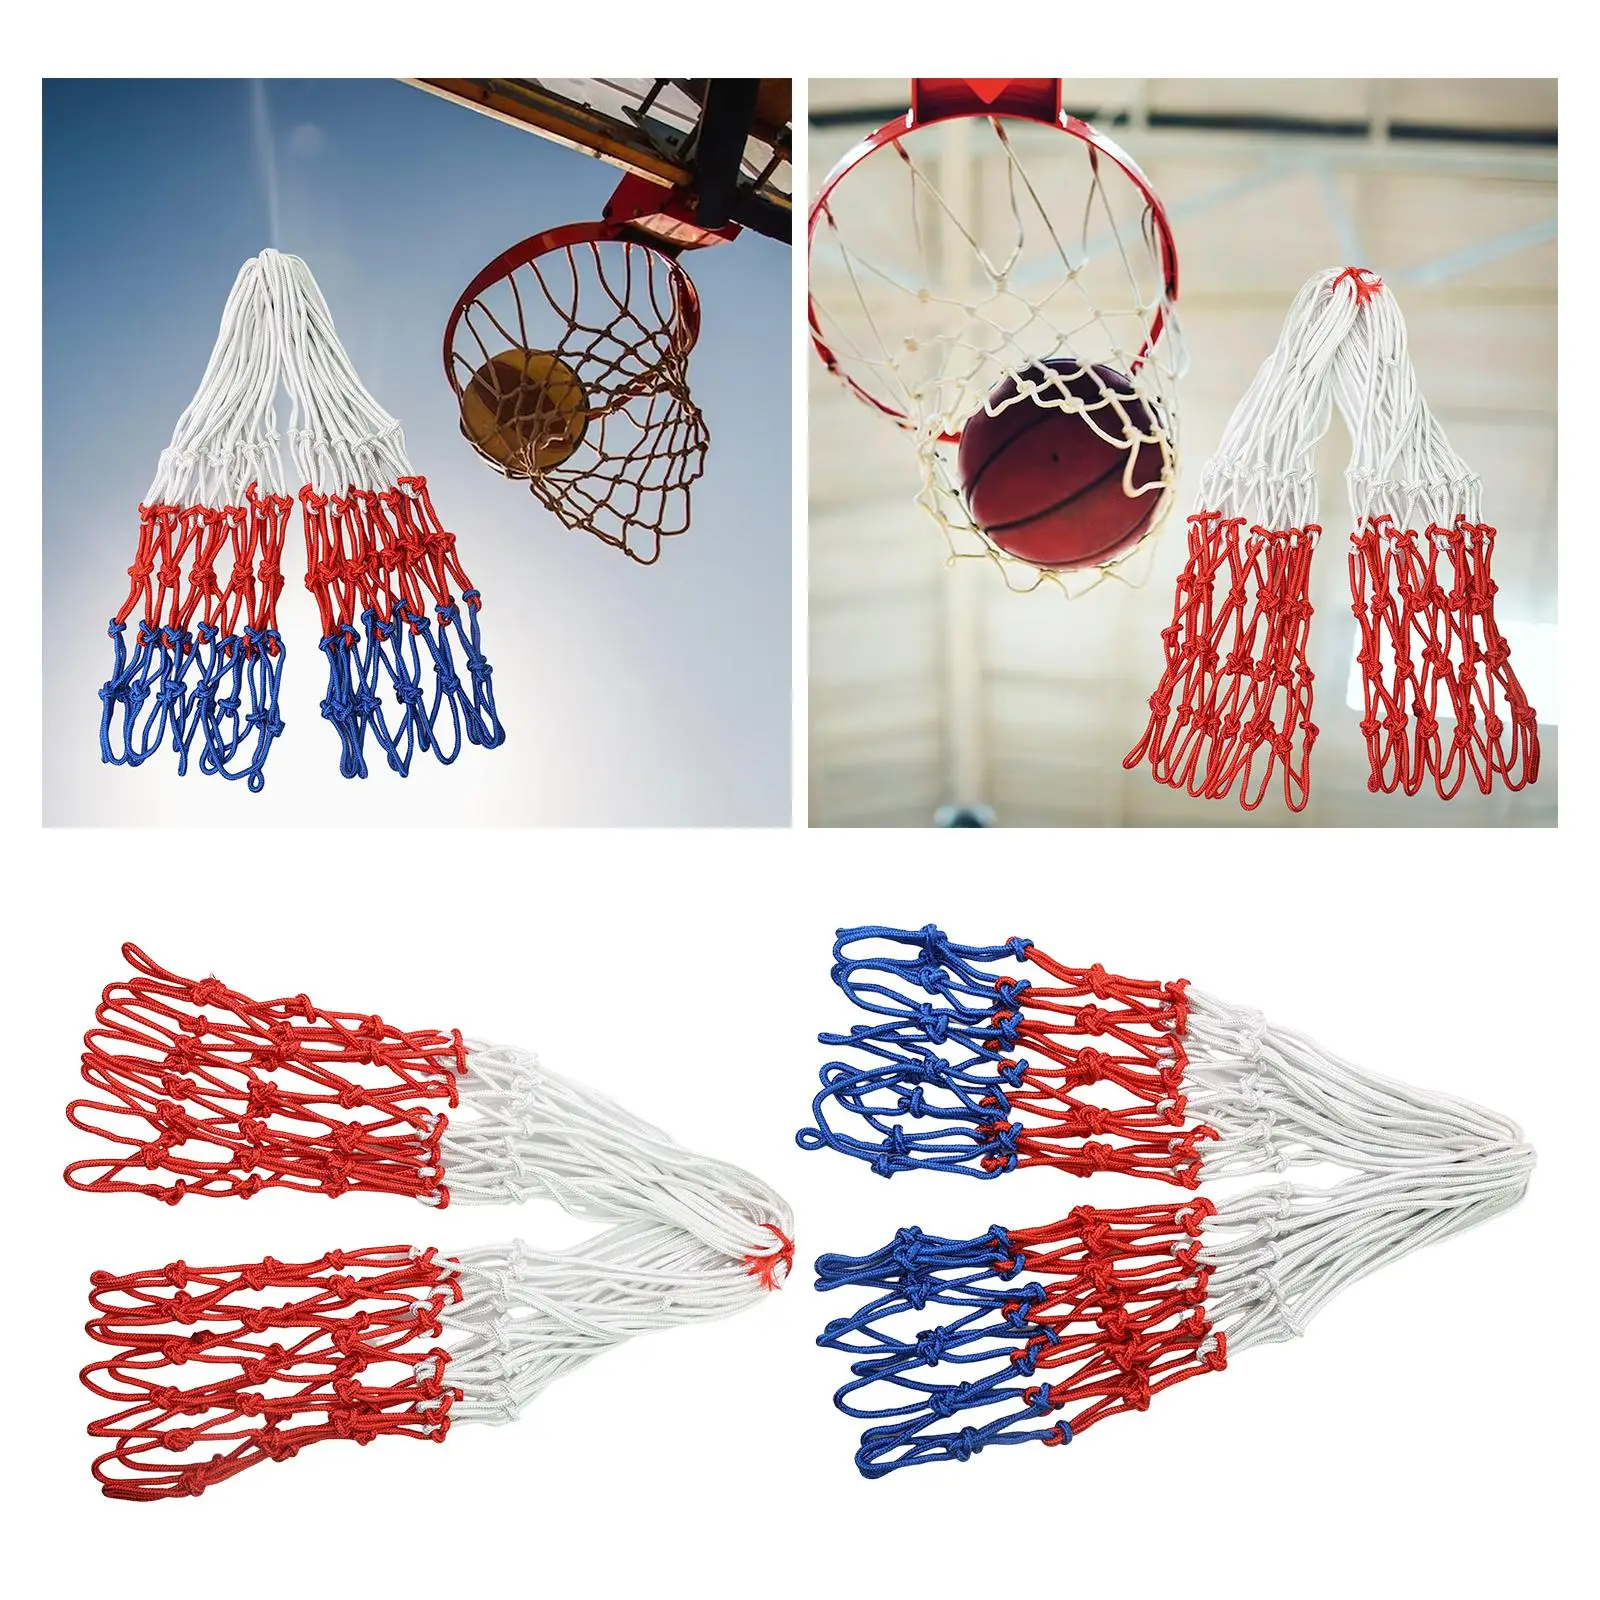 Basketball Net Replacement Professional Braided Rope Basketball Court Equipment Premium Fits Standard Indoor or Outdoor Rims